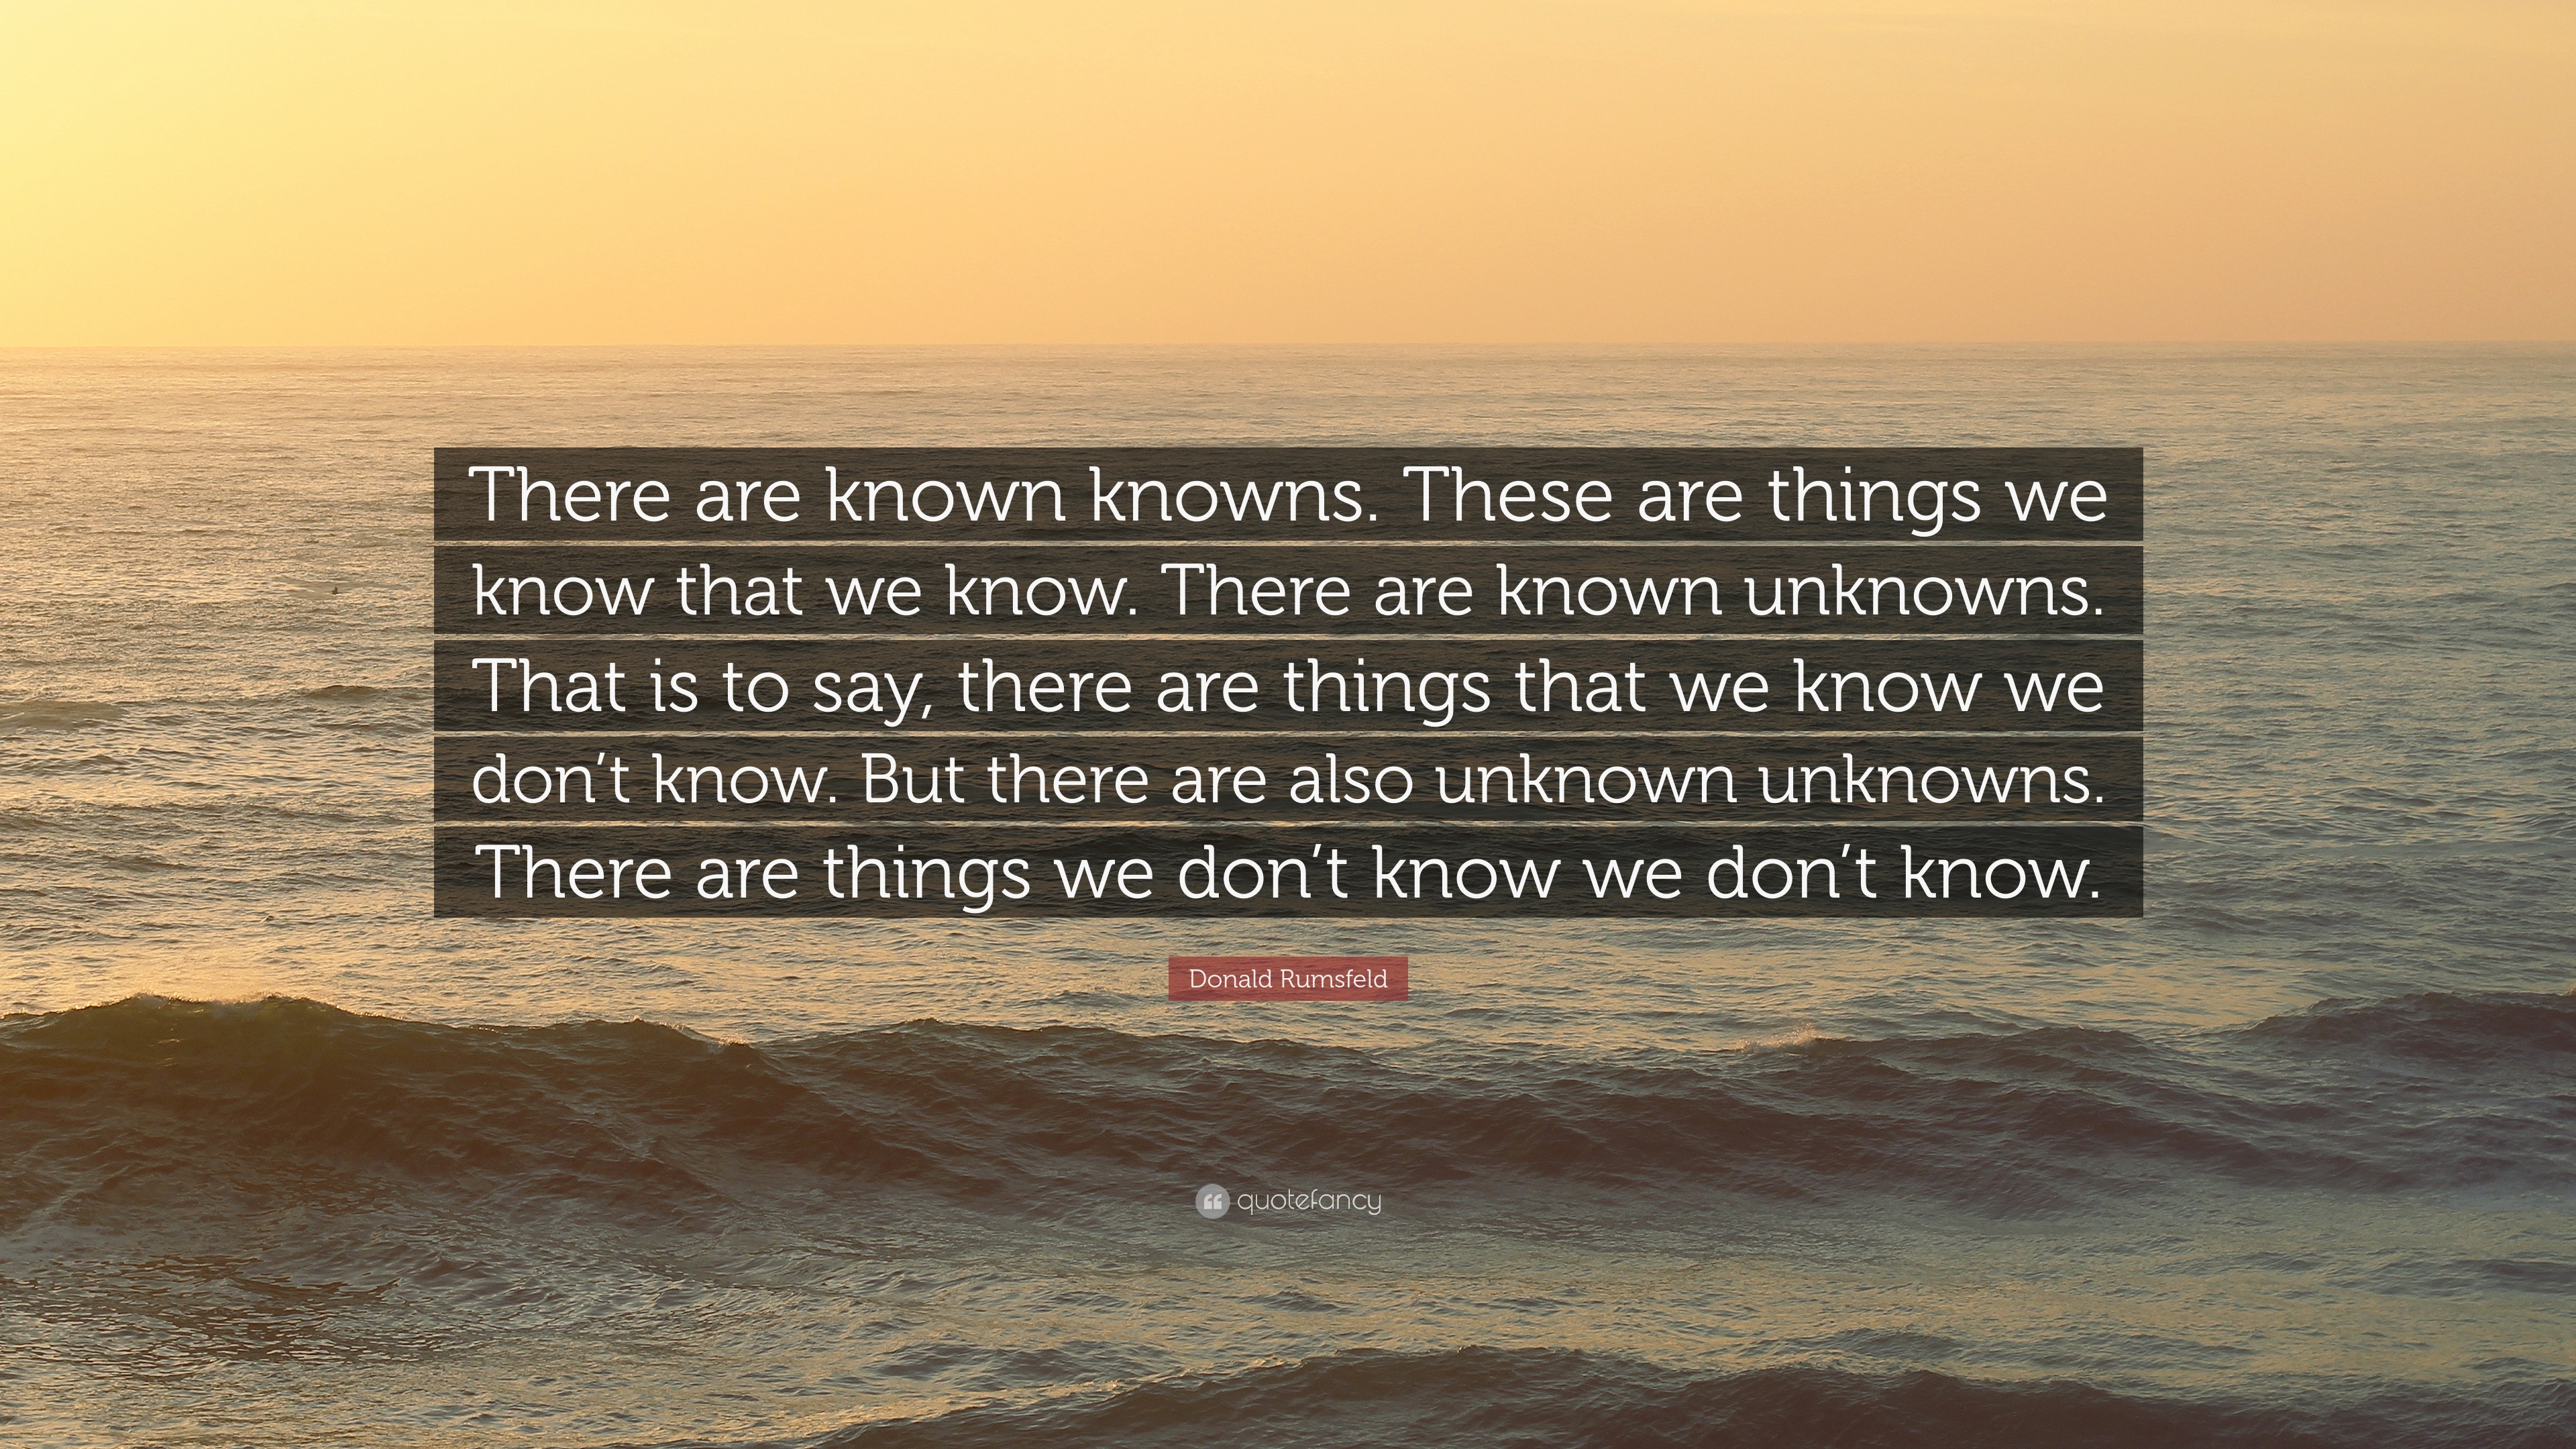 known unknowns